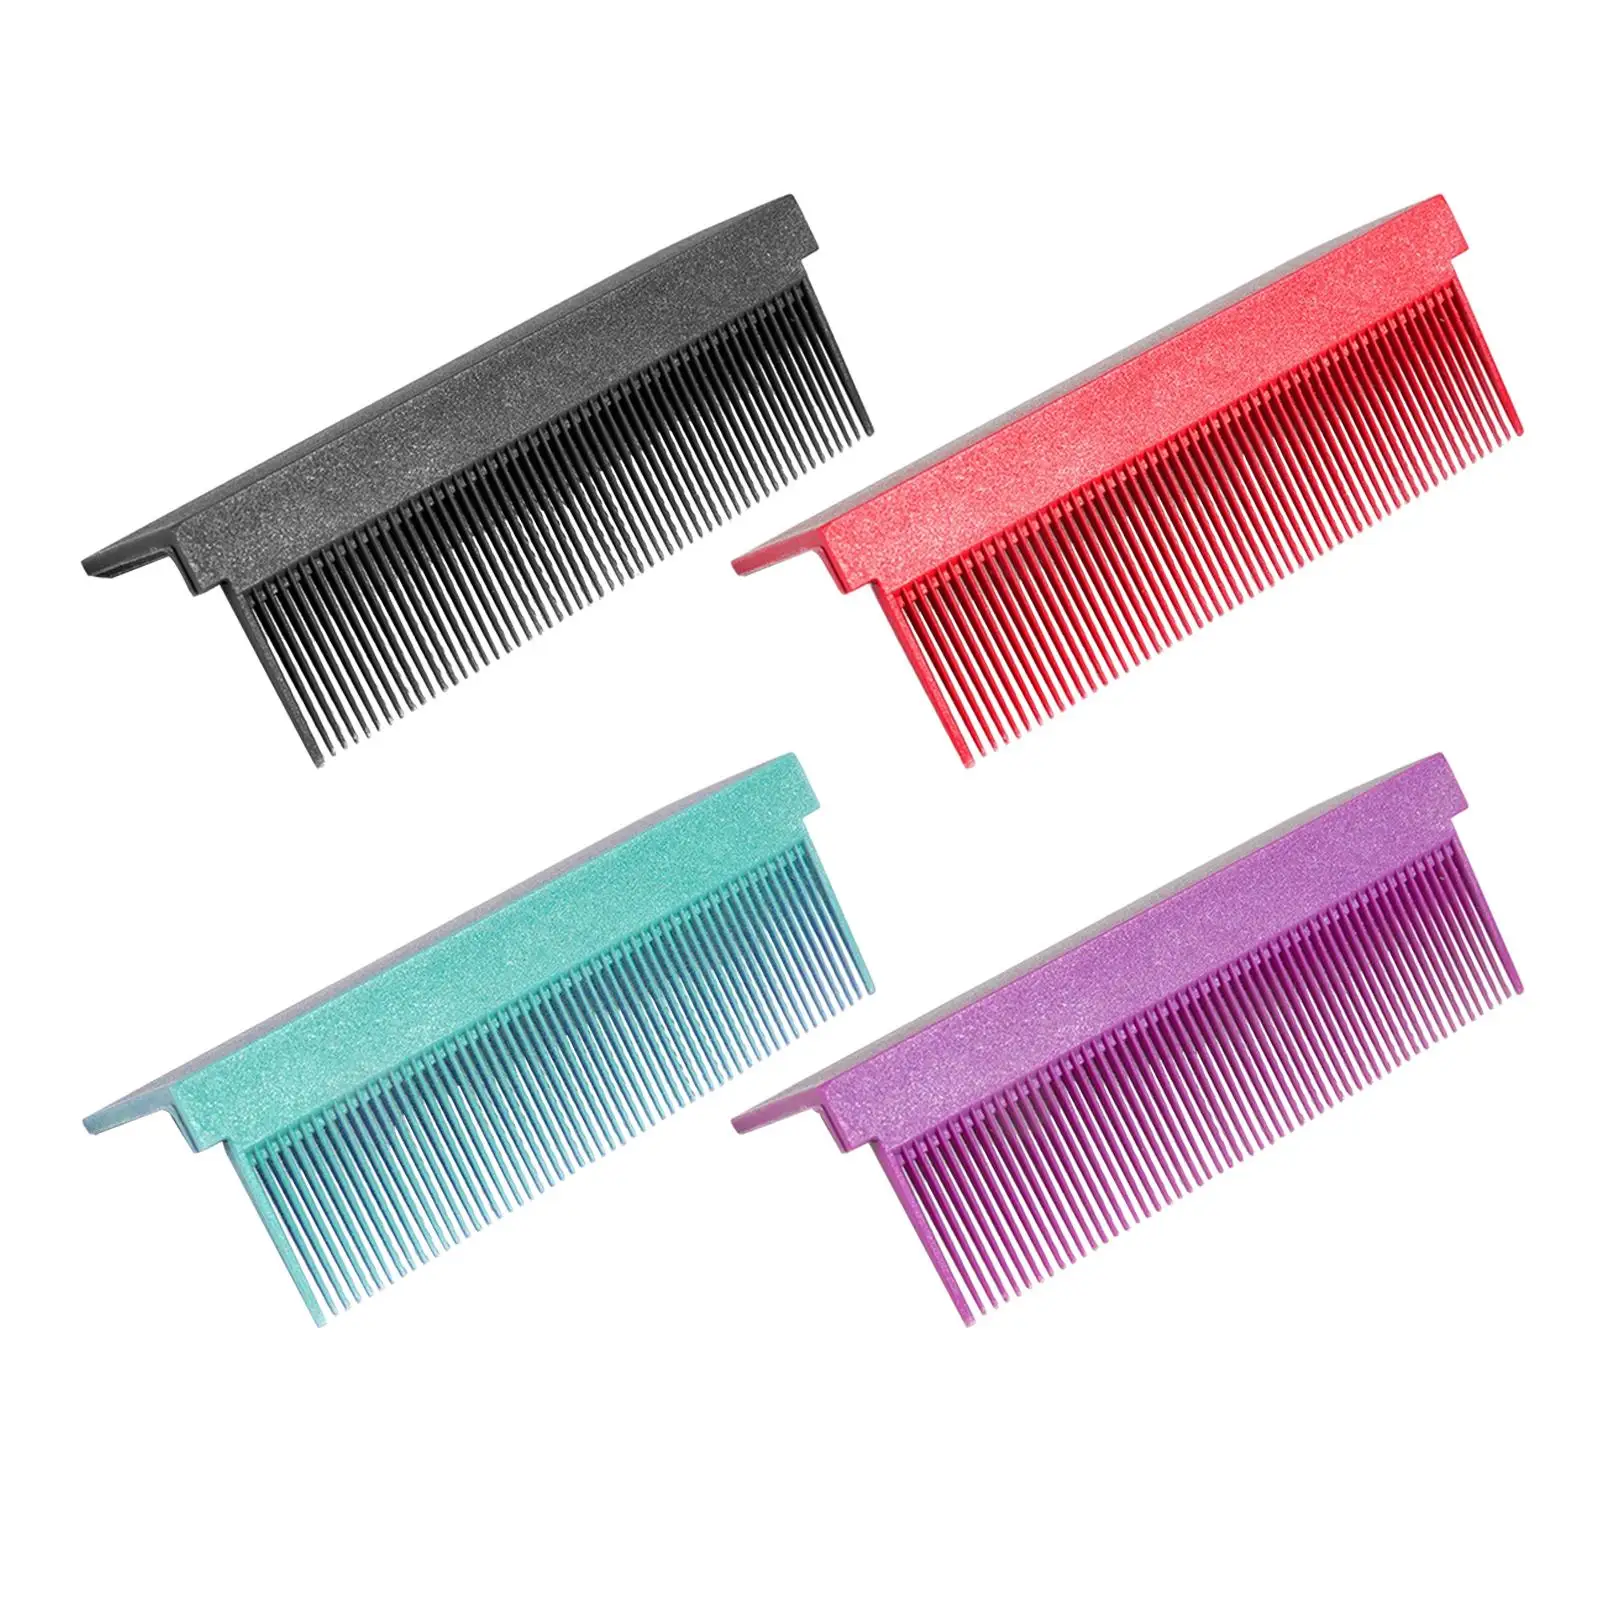 Straightening Comb Attachment for Folding Hair Straightener Travel and Home Hairdressing Easily Carry Professional Lightweight